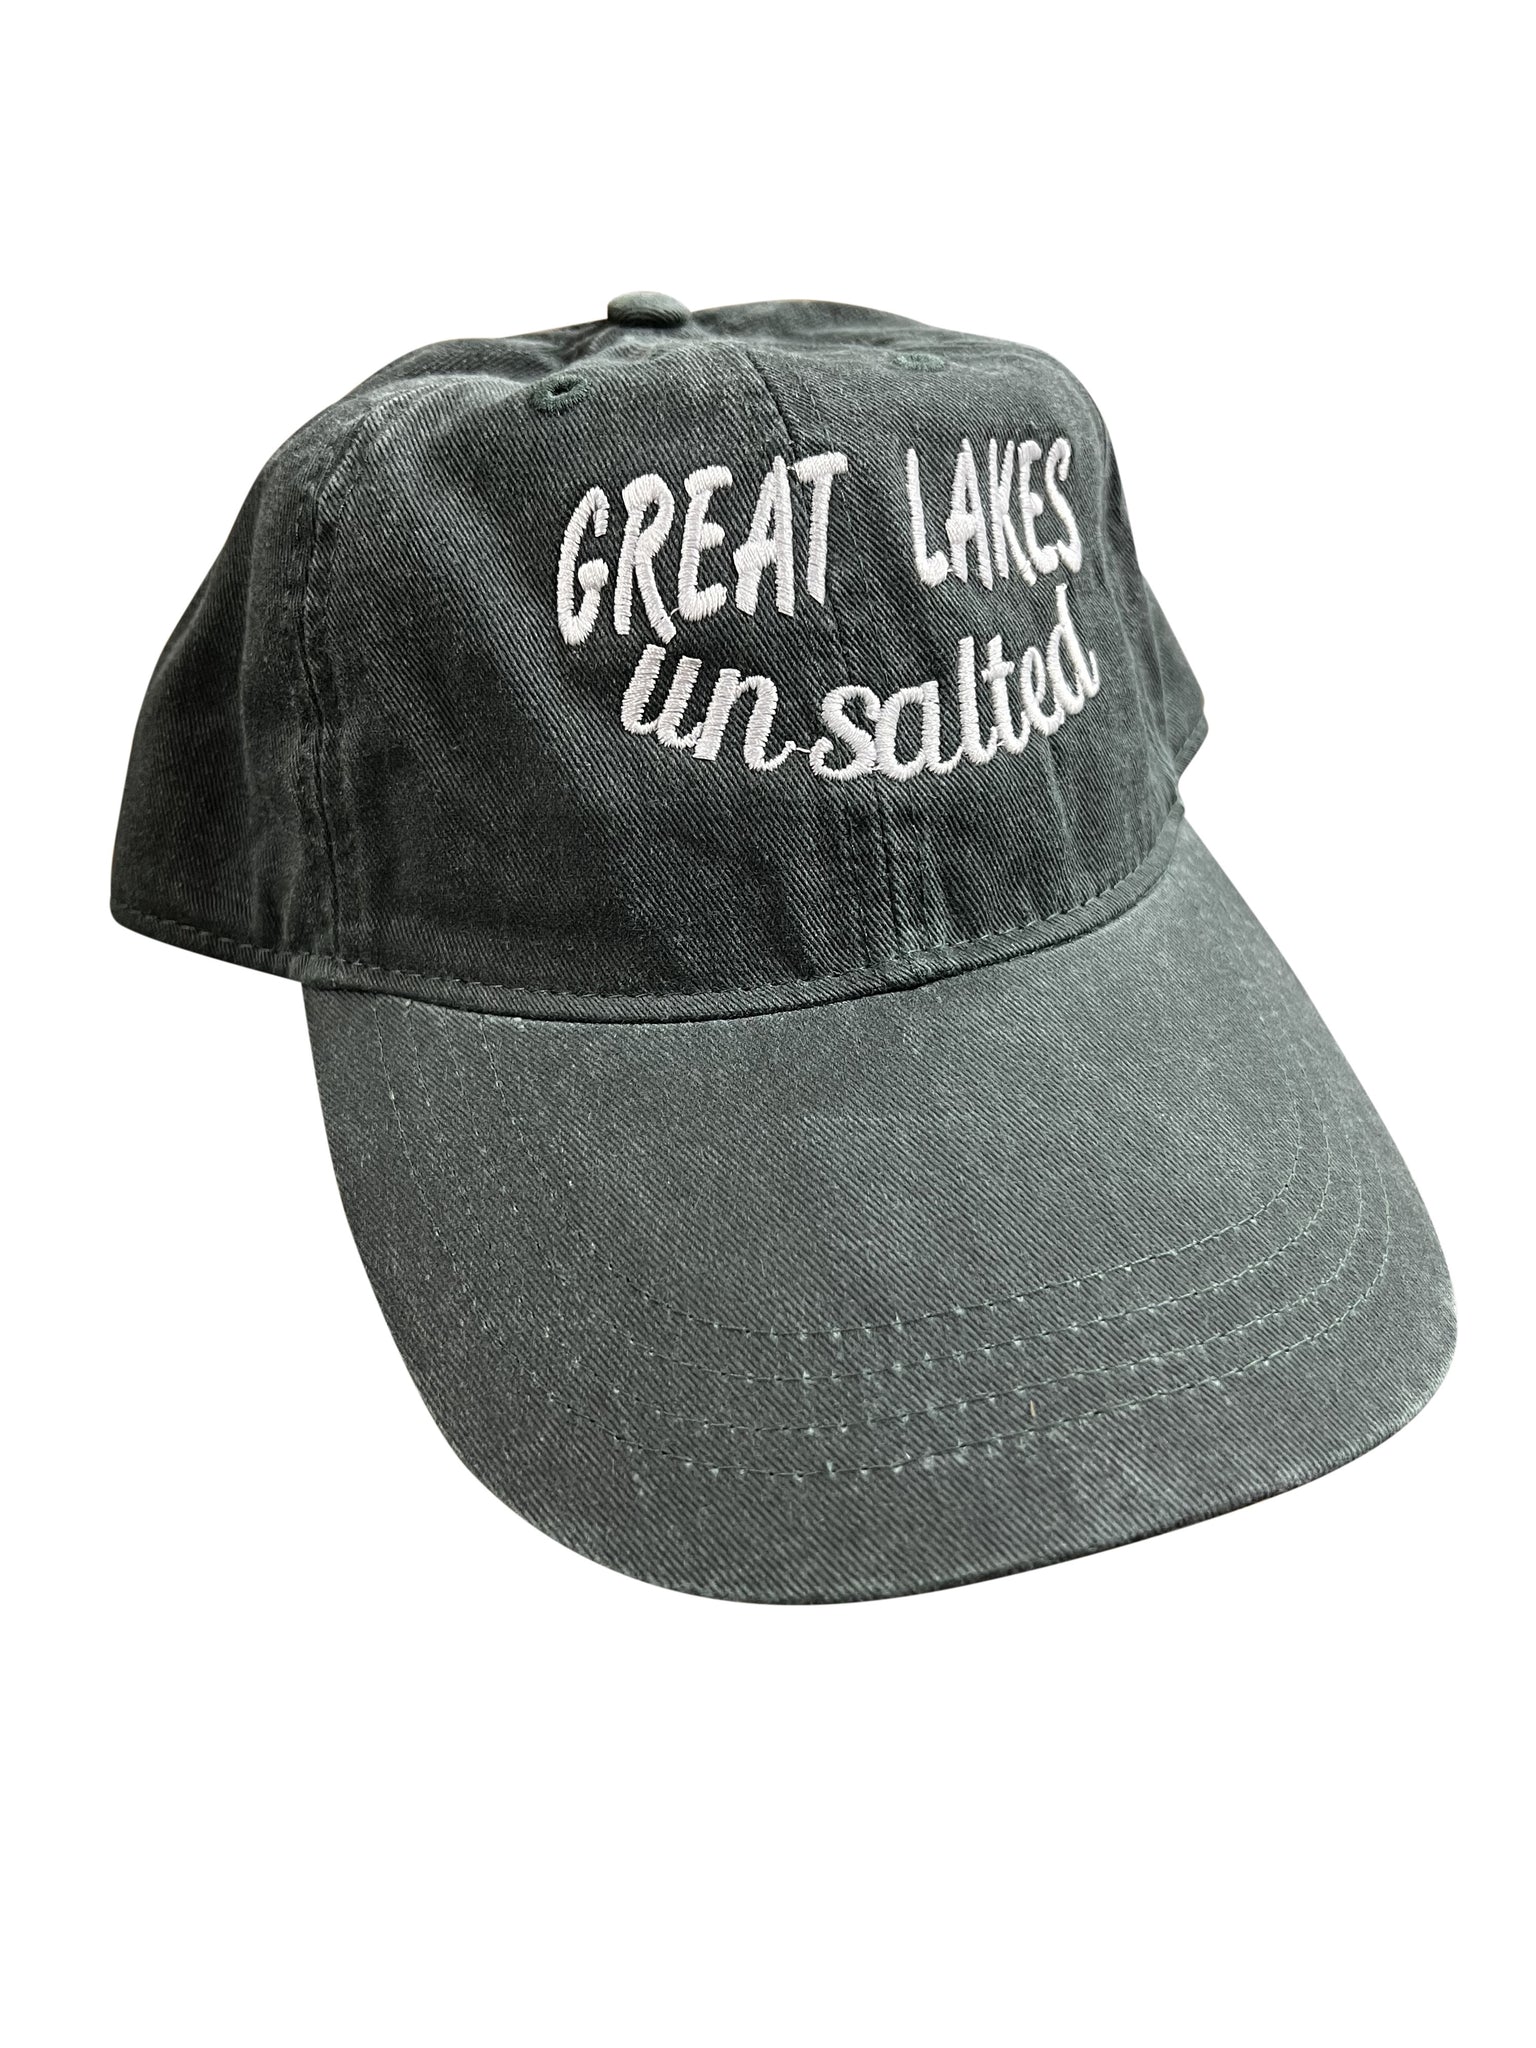 Great Lakes Unsalted Hat